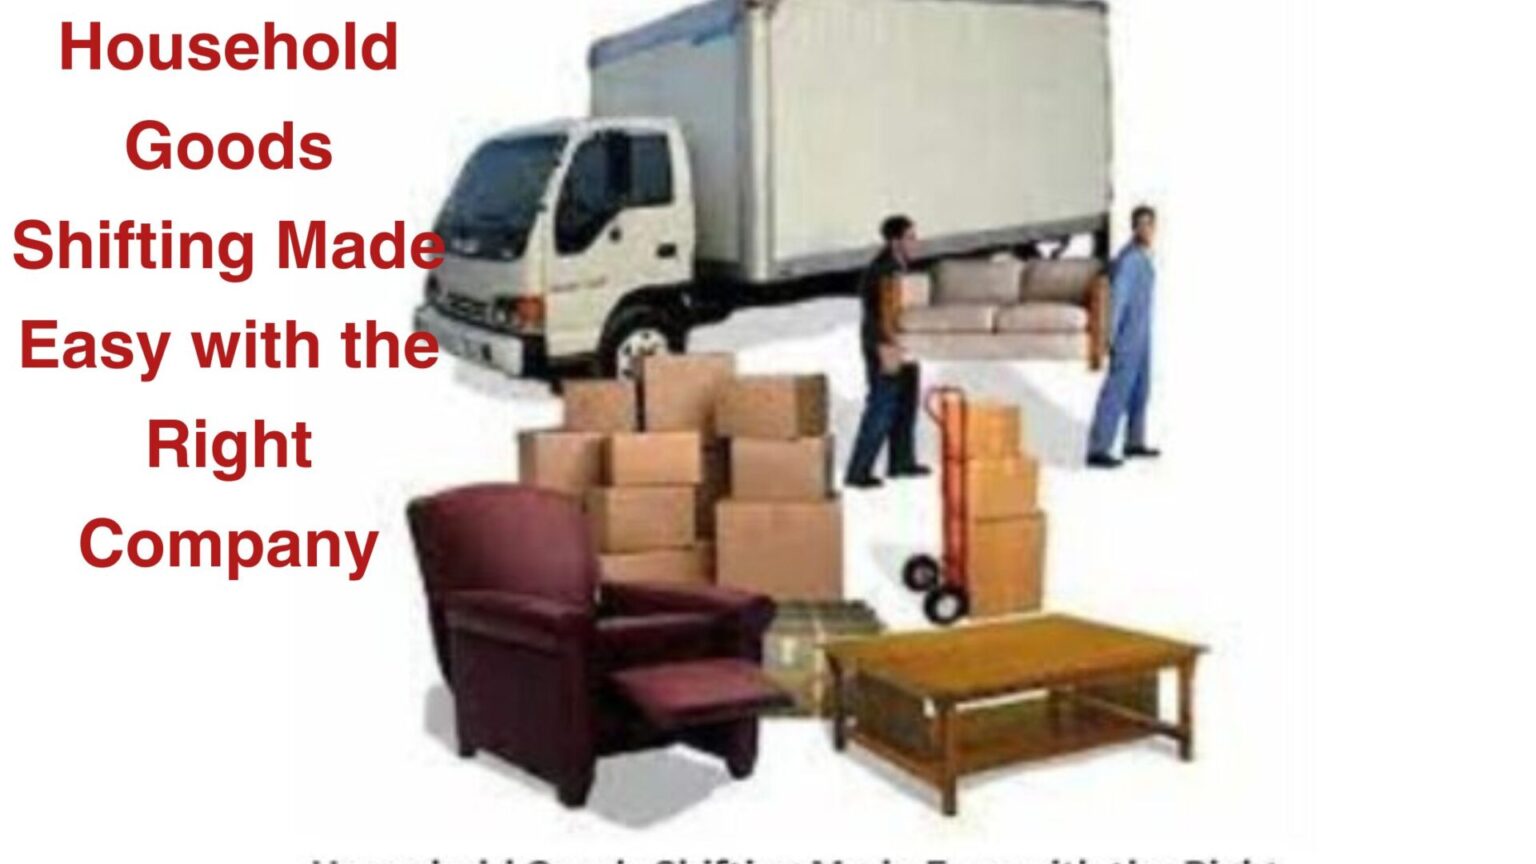 Household Goods Shifting Made Easy with the Right Company